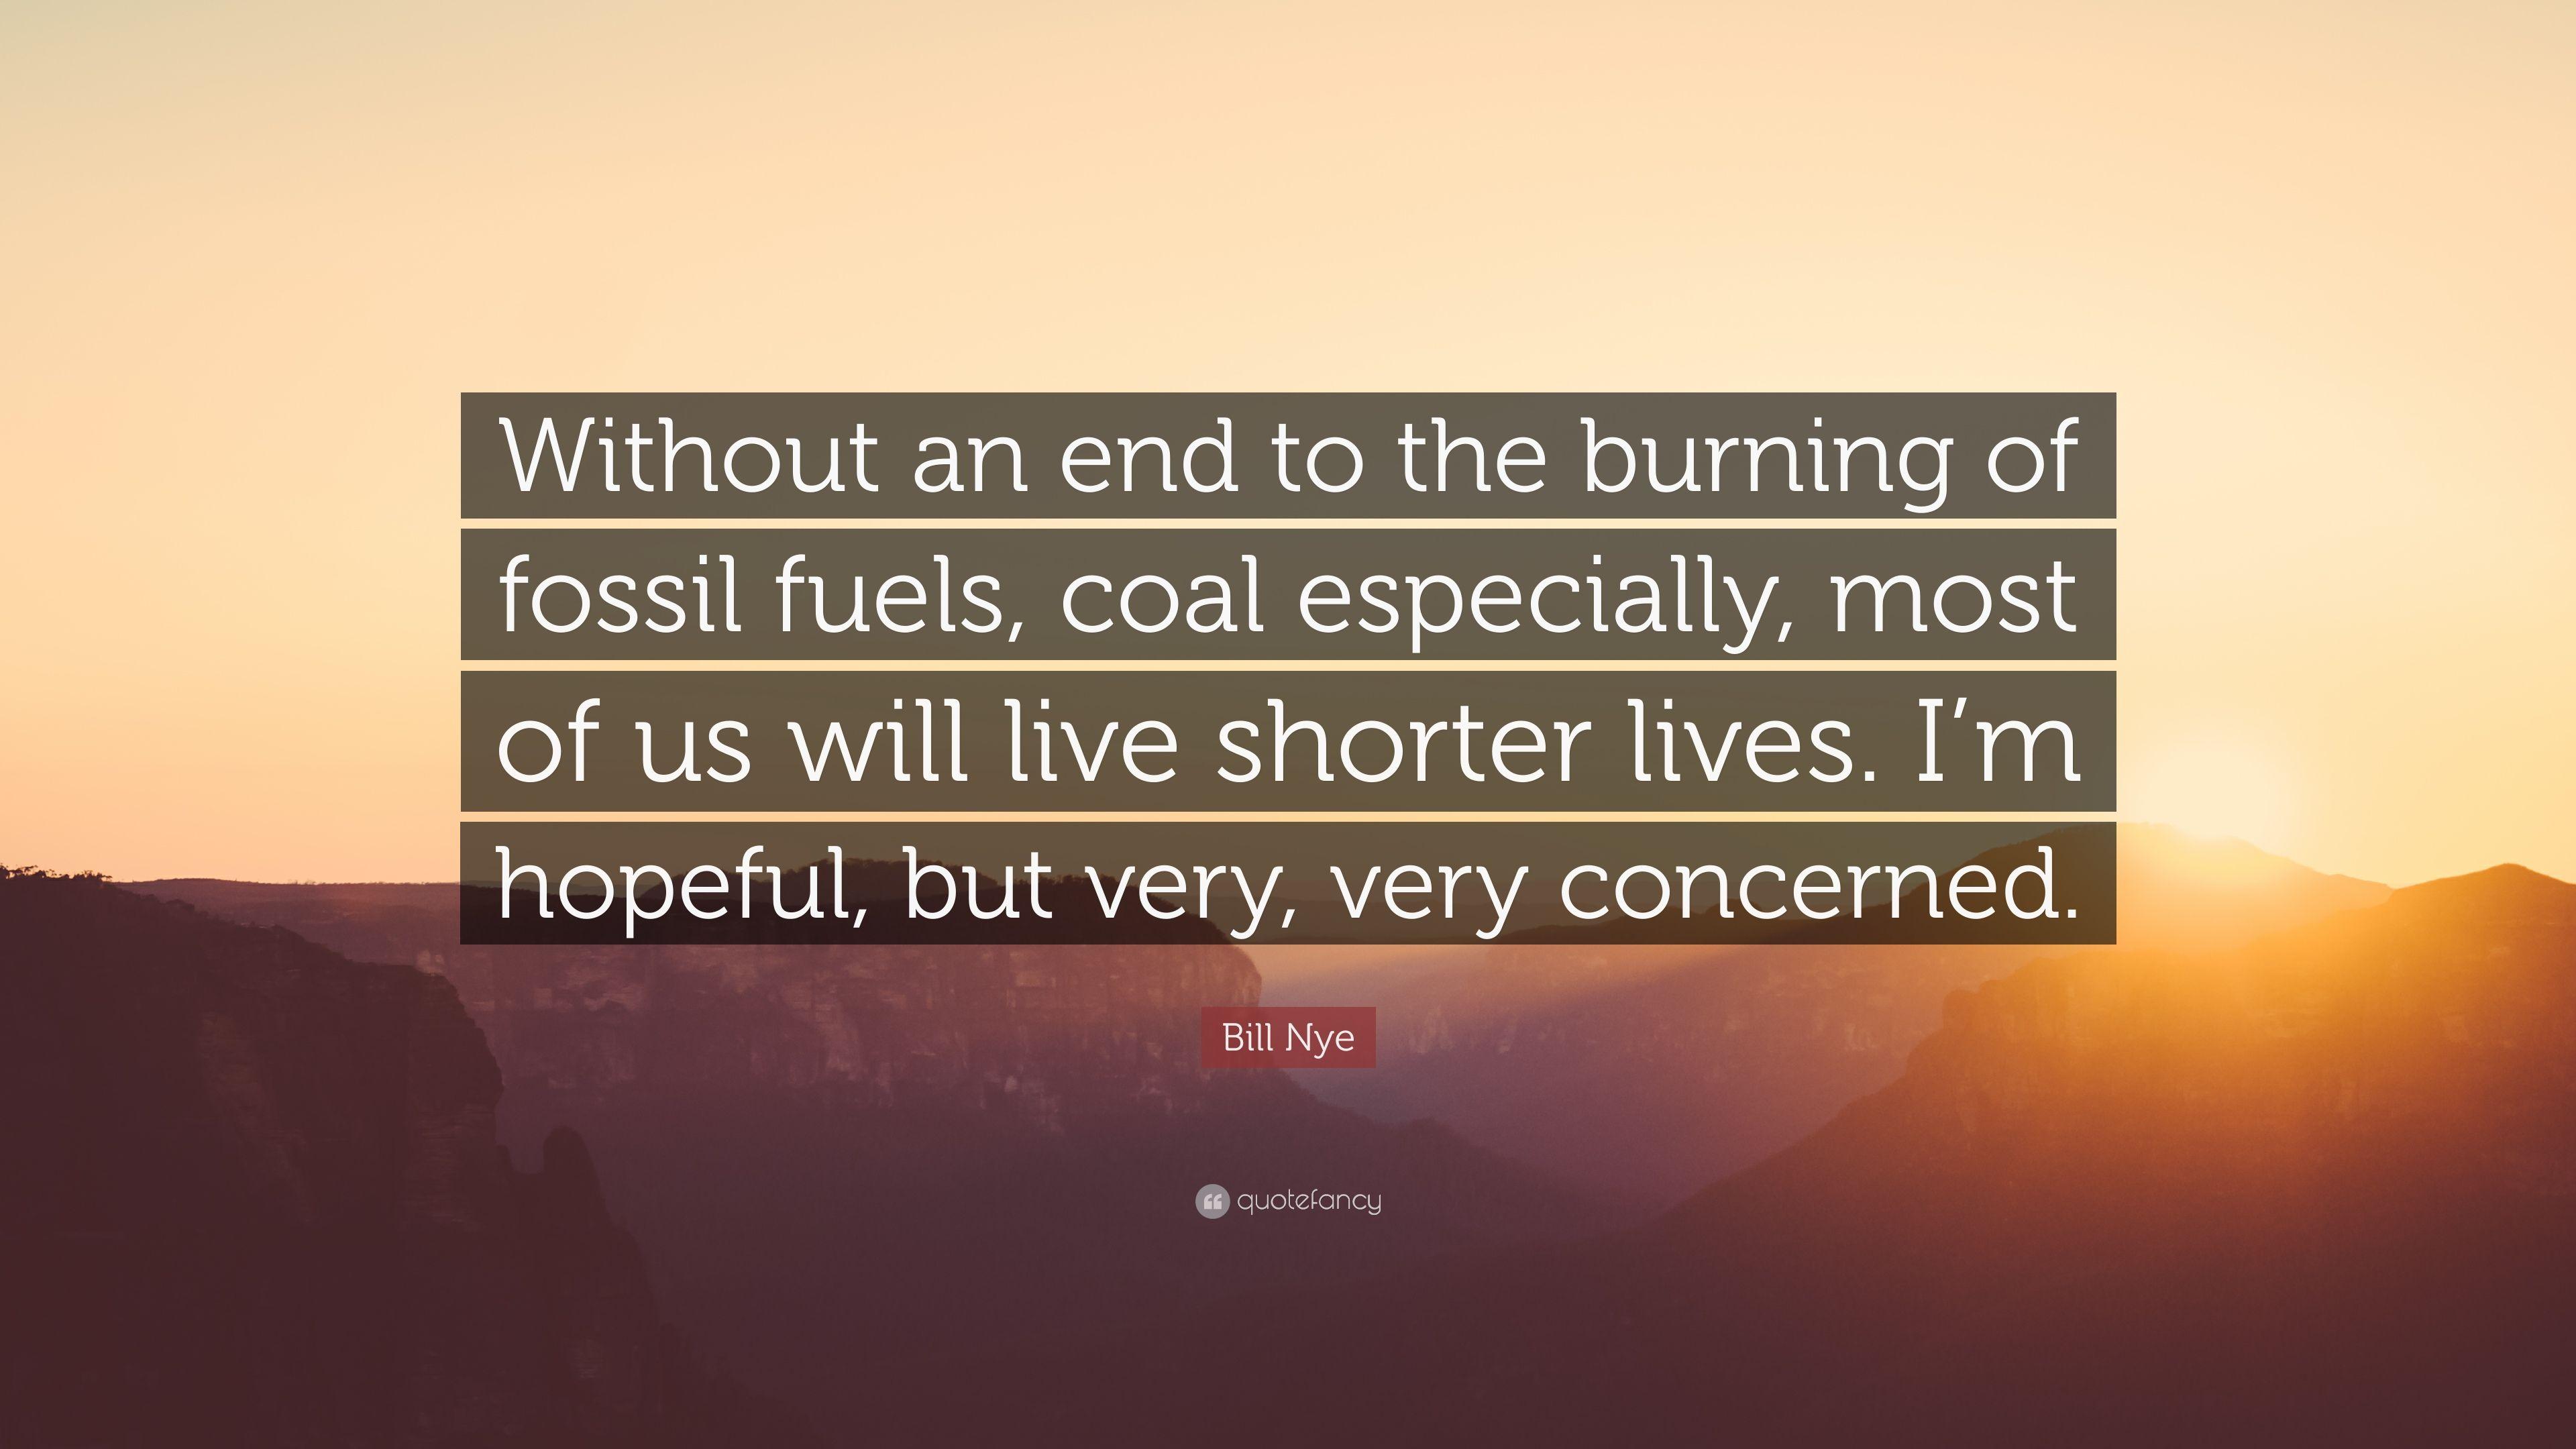 Bill Nye Quote: “Without an end to the burning of fossil fuels, coal